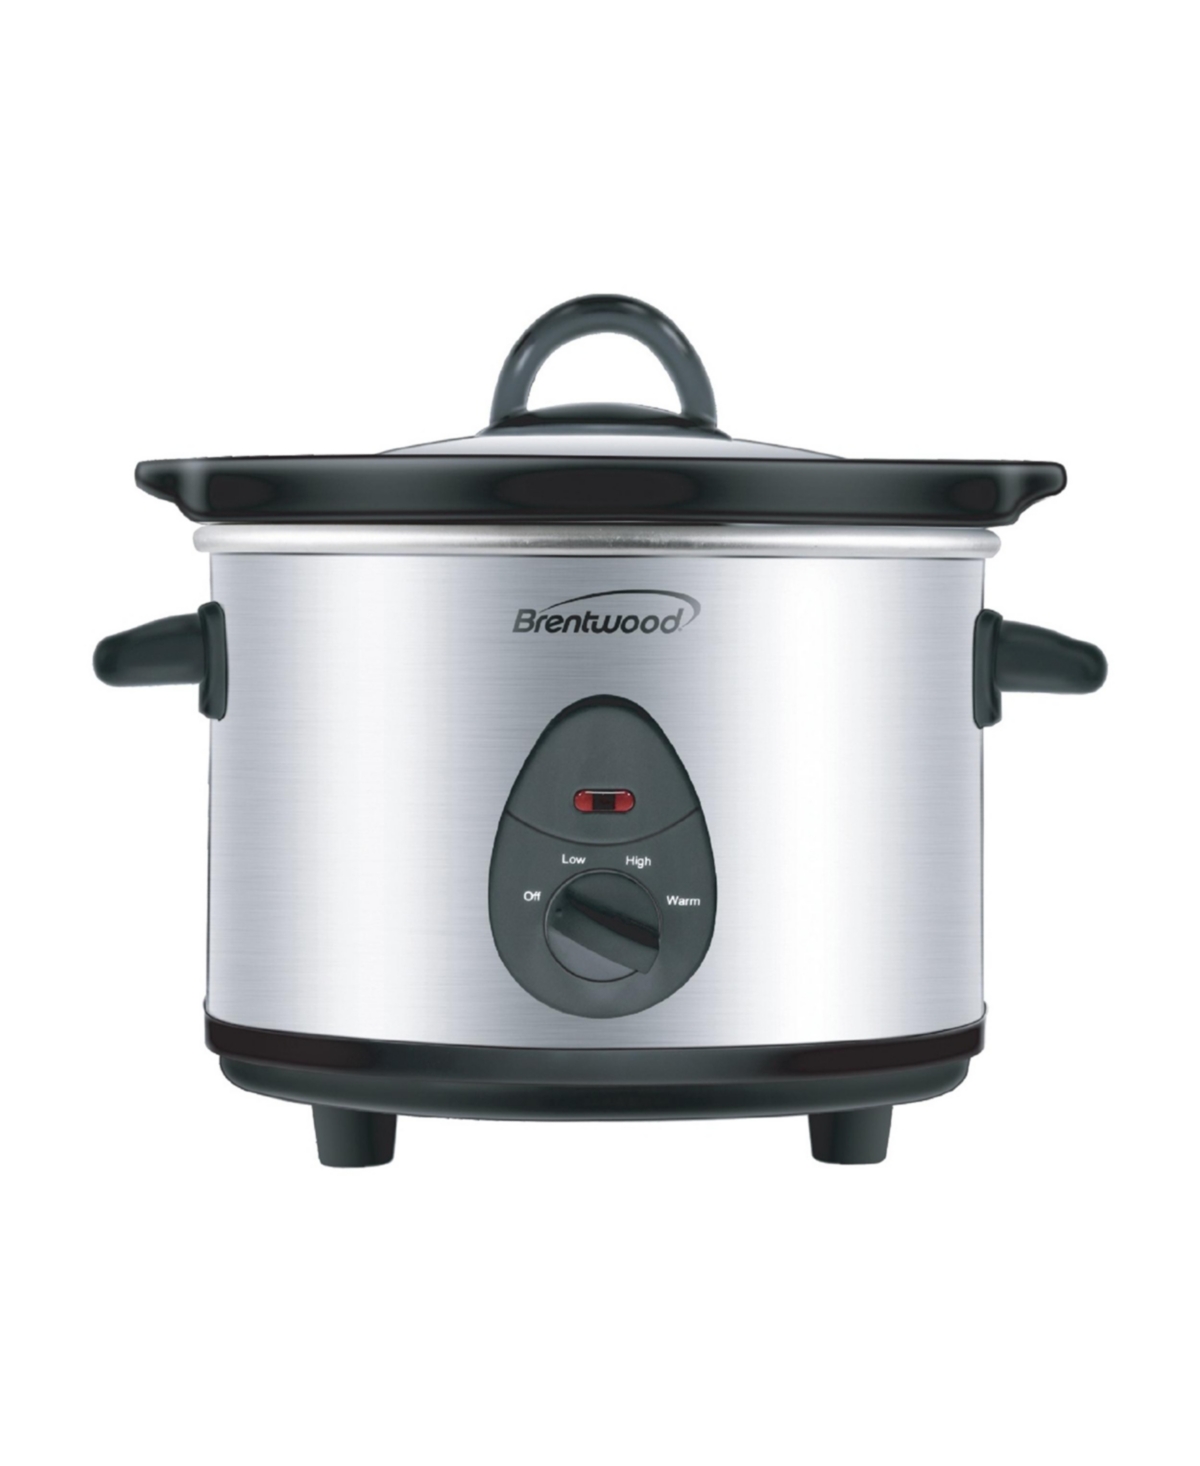 Brentwood 1.5 Quart Slow Cooker in Stainless Steel with 3 Settings - Silver